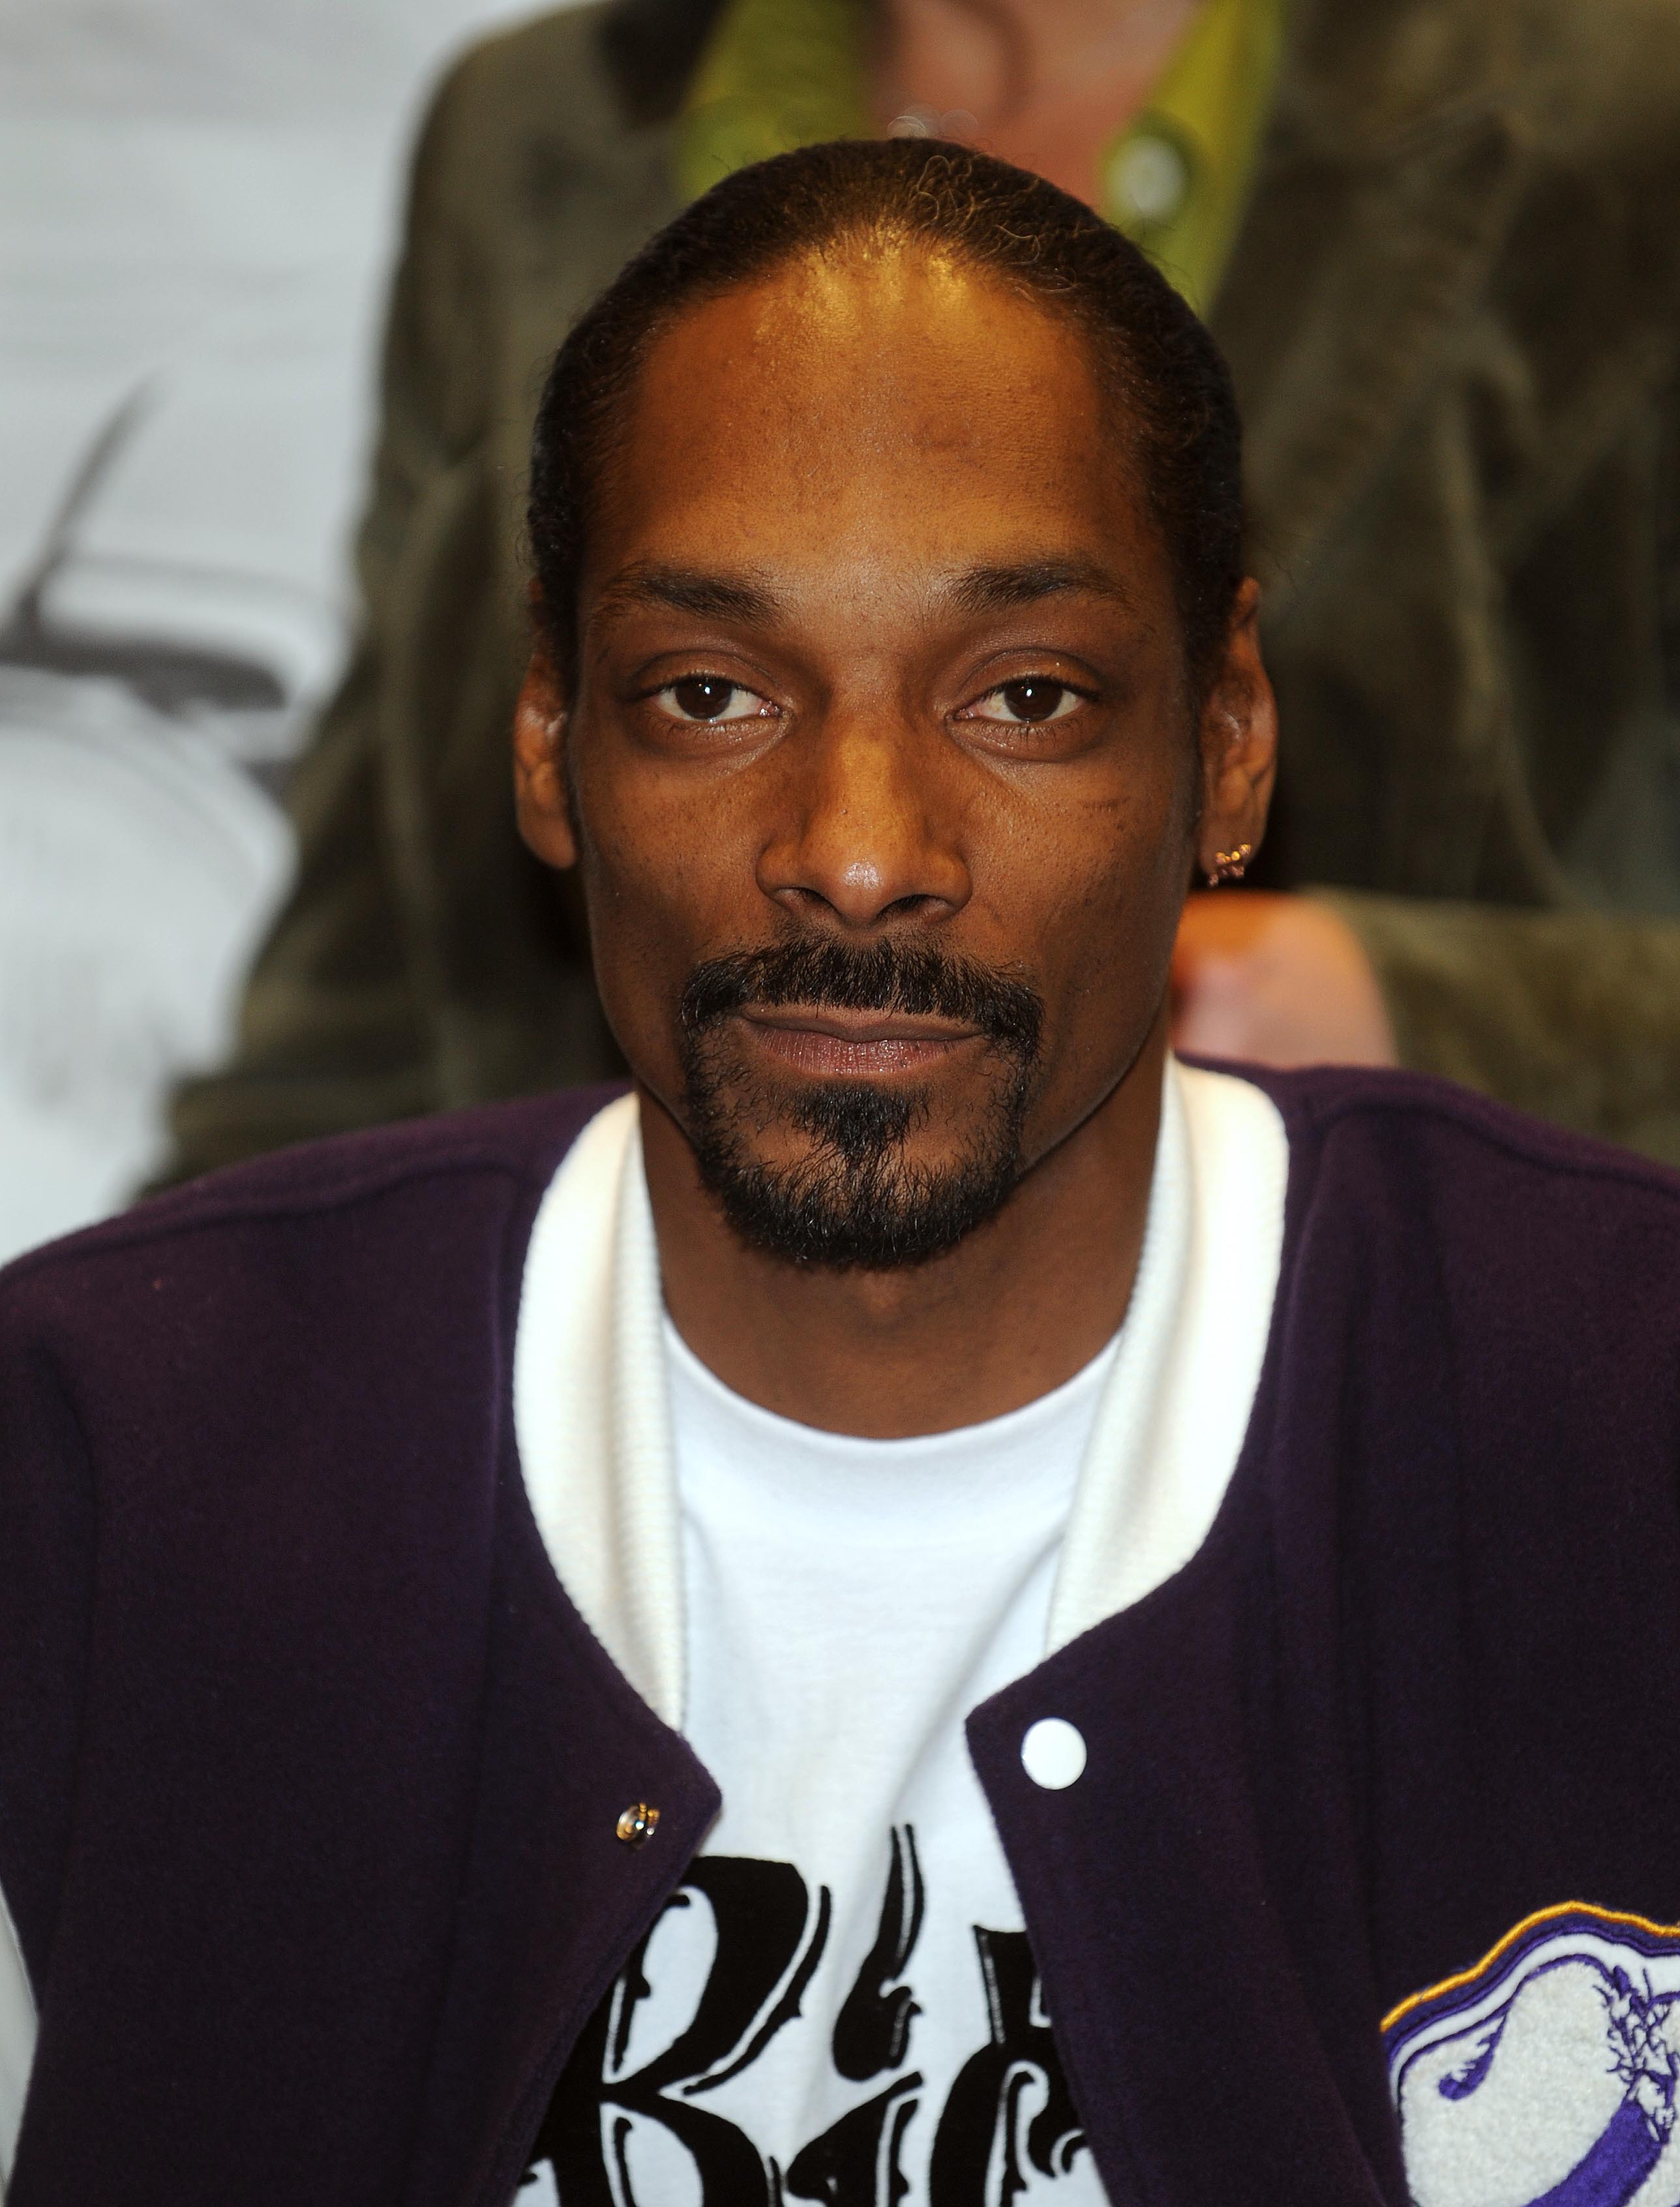 Snoop Dogg signs copies of "Ego Trippin'" at Best Buy  in New York City on March 12, 2008 | Source: Getty Images